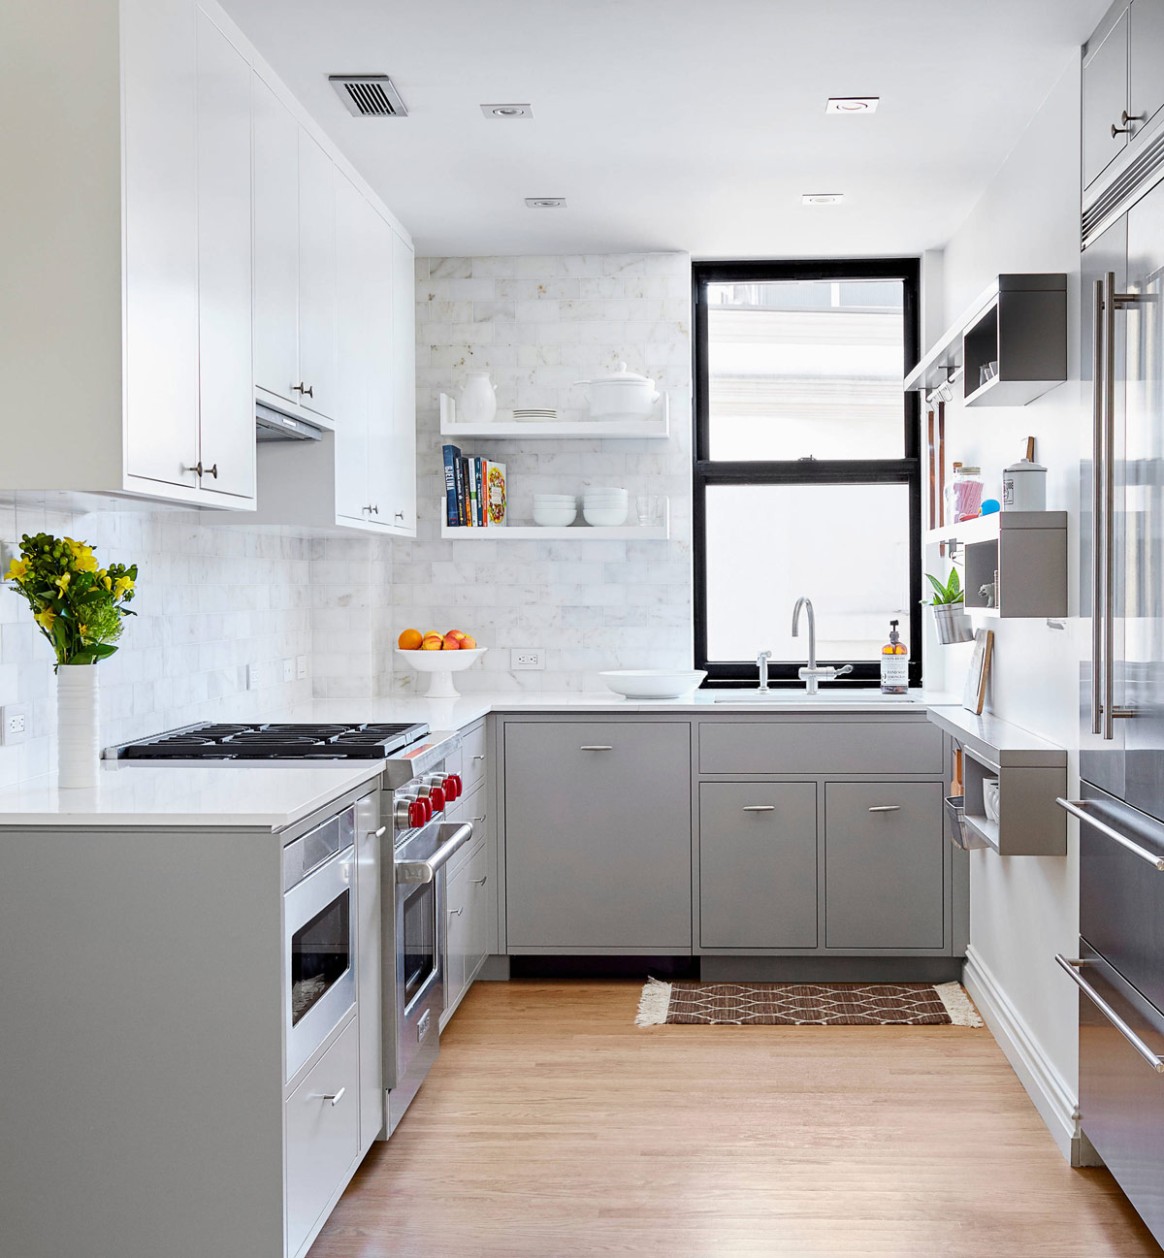 3 Gorgeous Grey and White Kitchens that Get Their Mix Right - grey and white kitchen